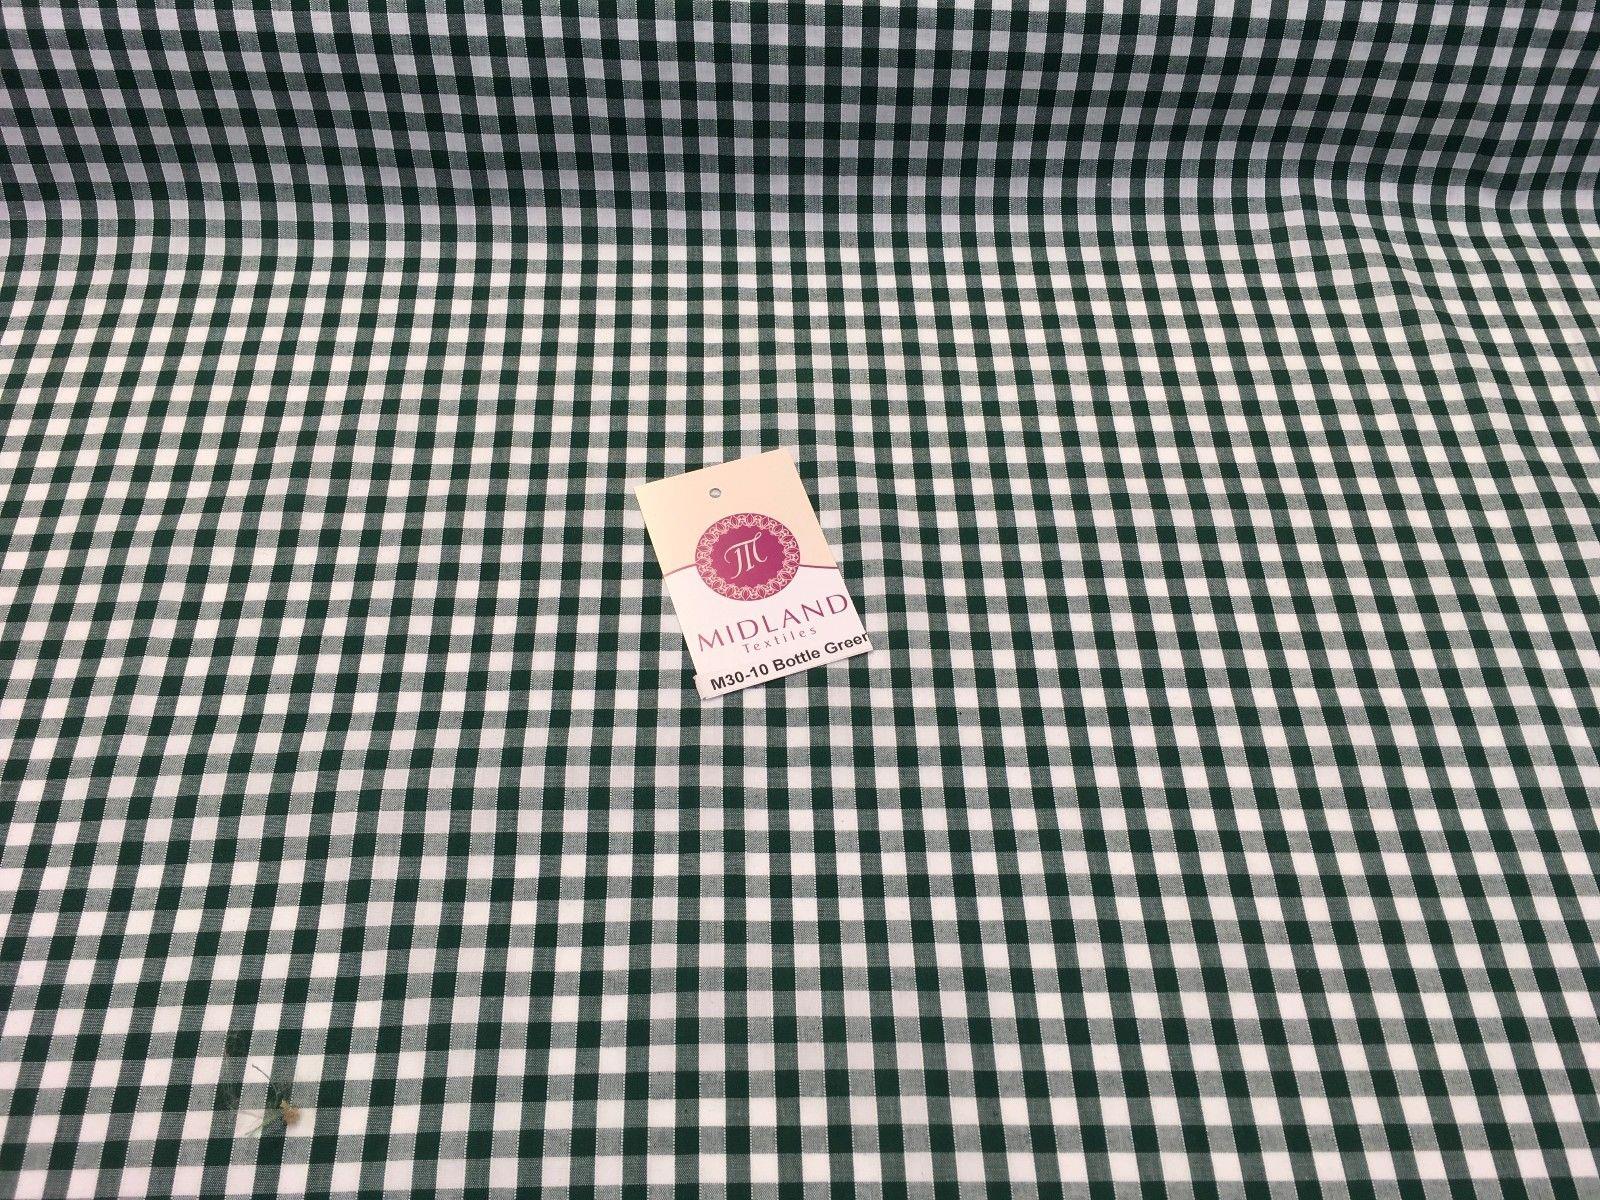 Timeless 1/4 Inch Gingham Fabric Material for Clothing, Aprons, Tablecloths, School Decorations - 44" Wide - M30